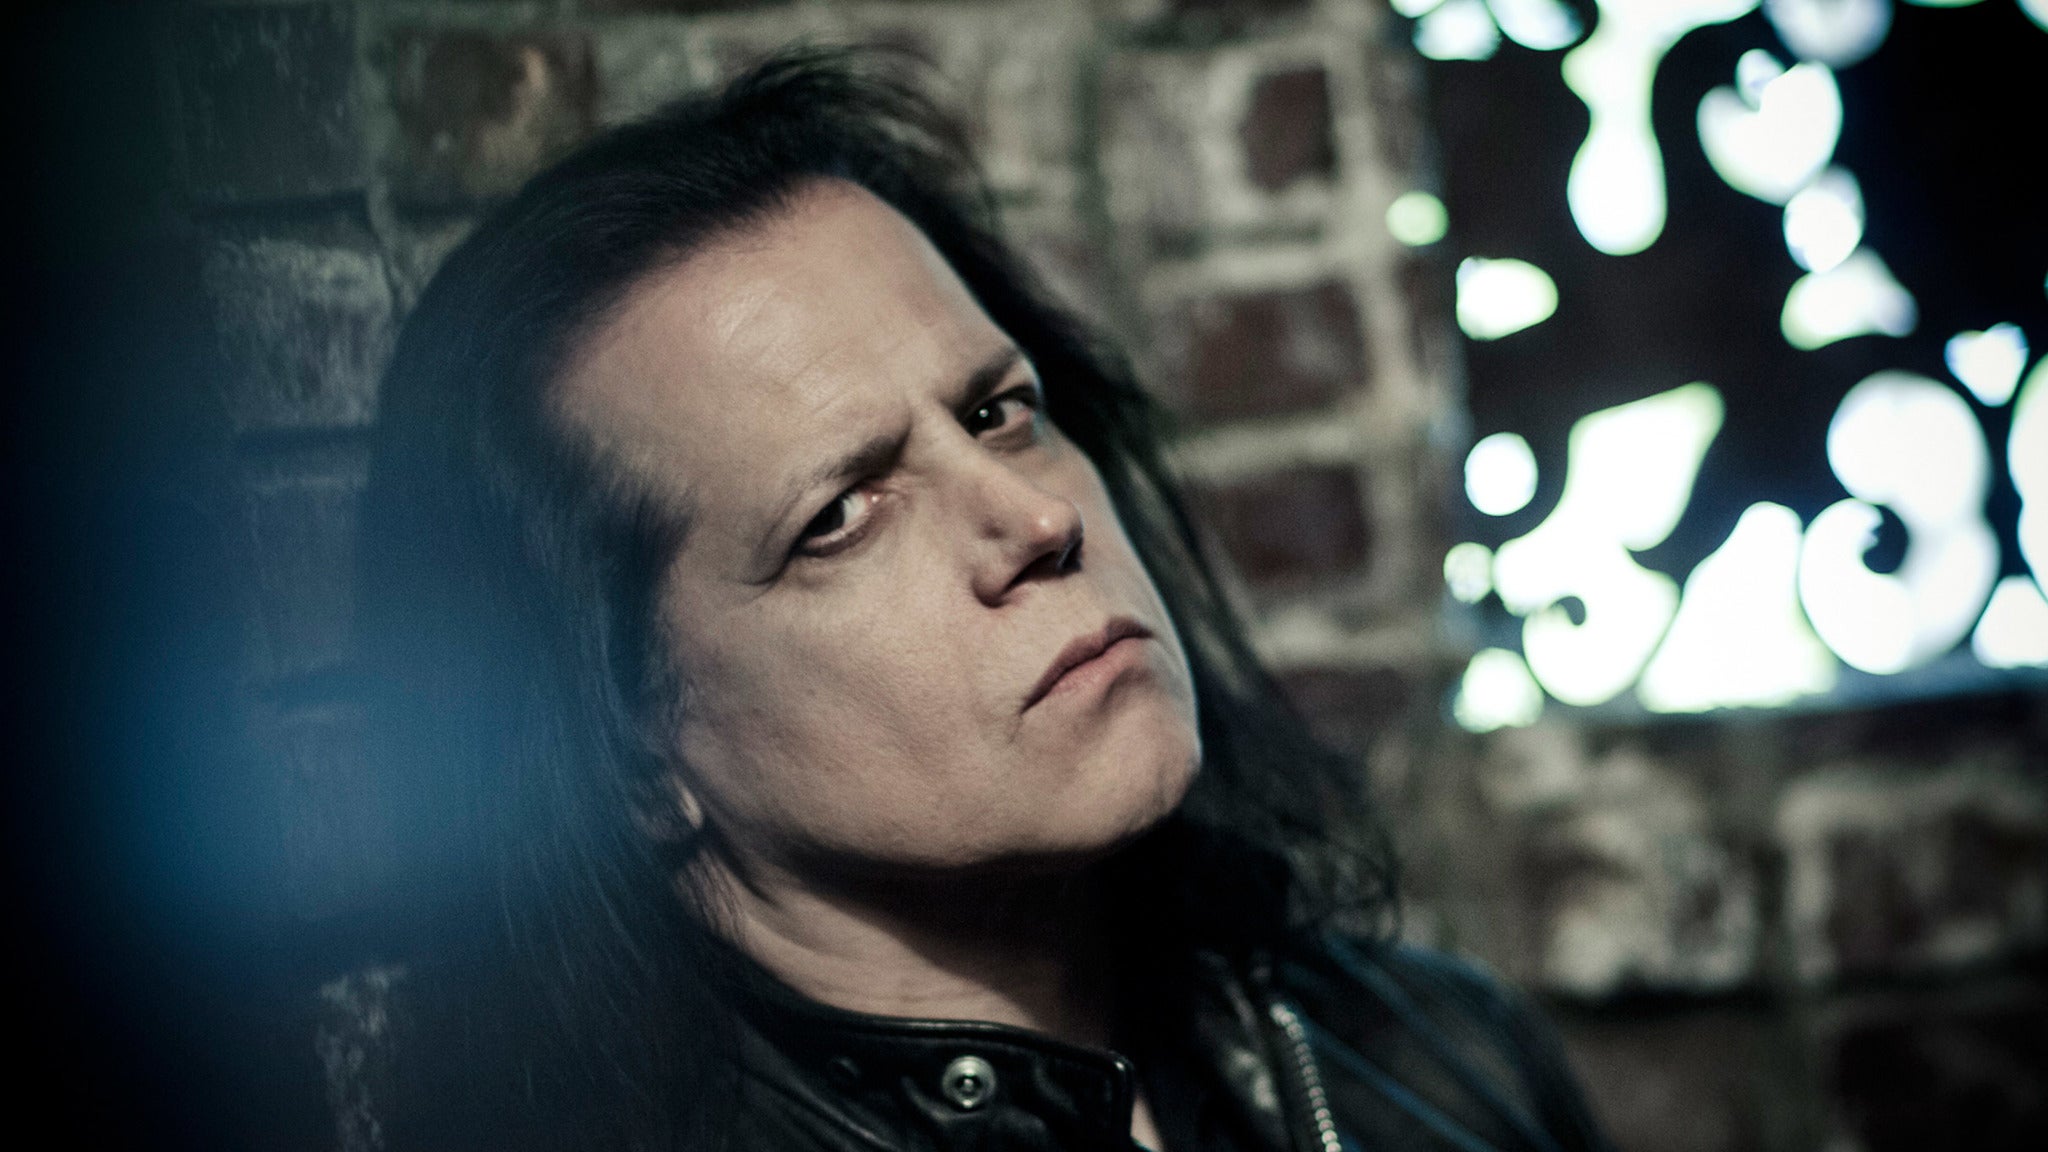 Danzig presale code for real tickets in Houston